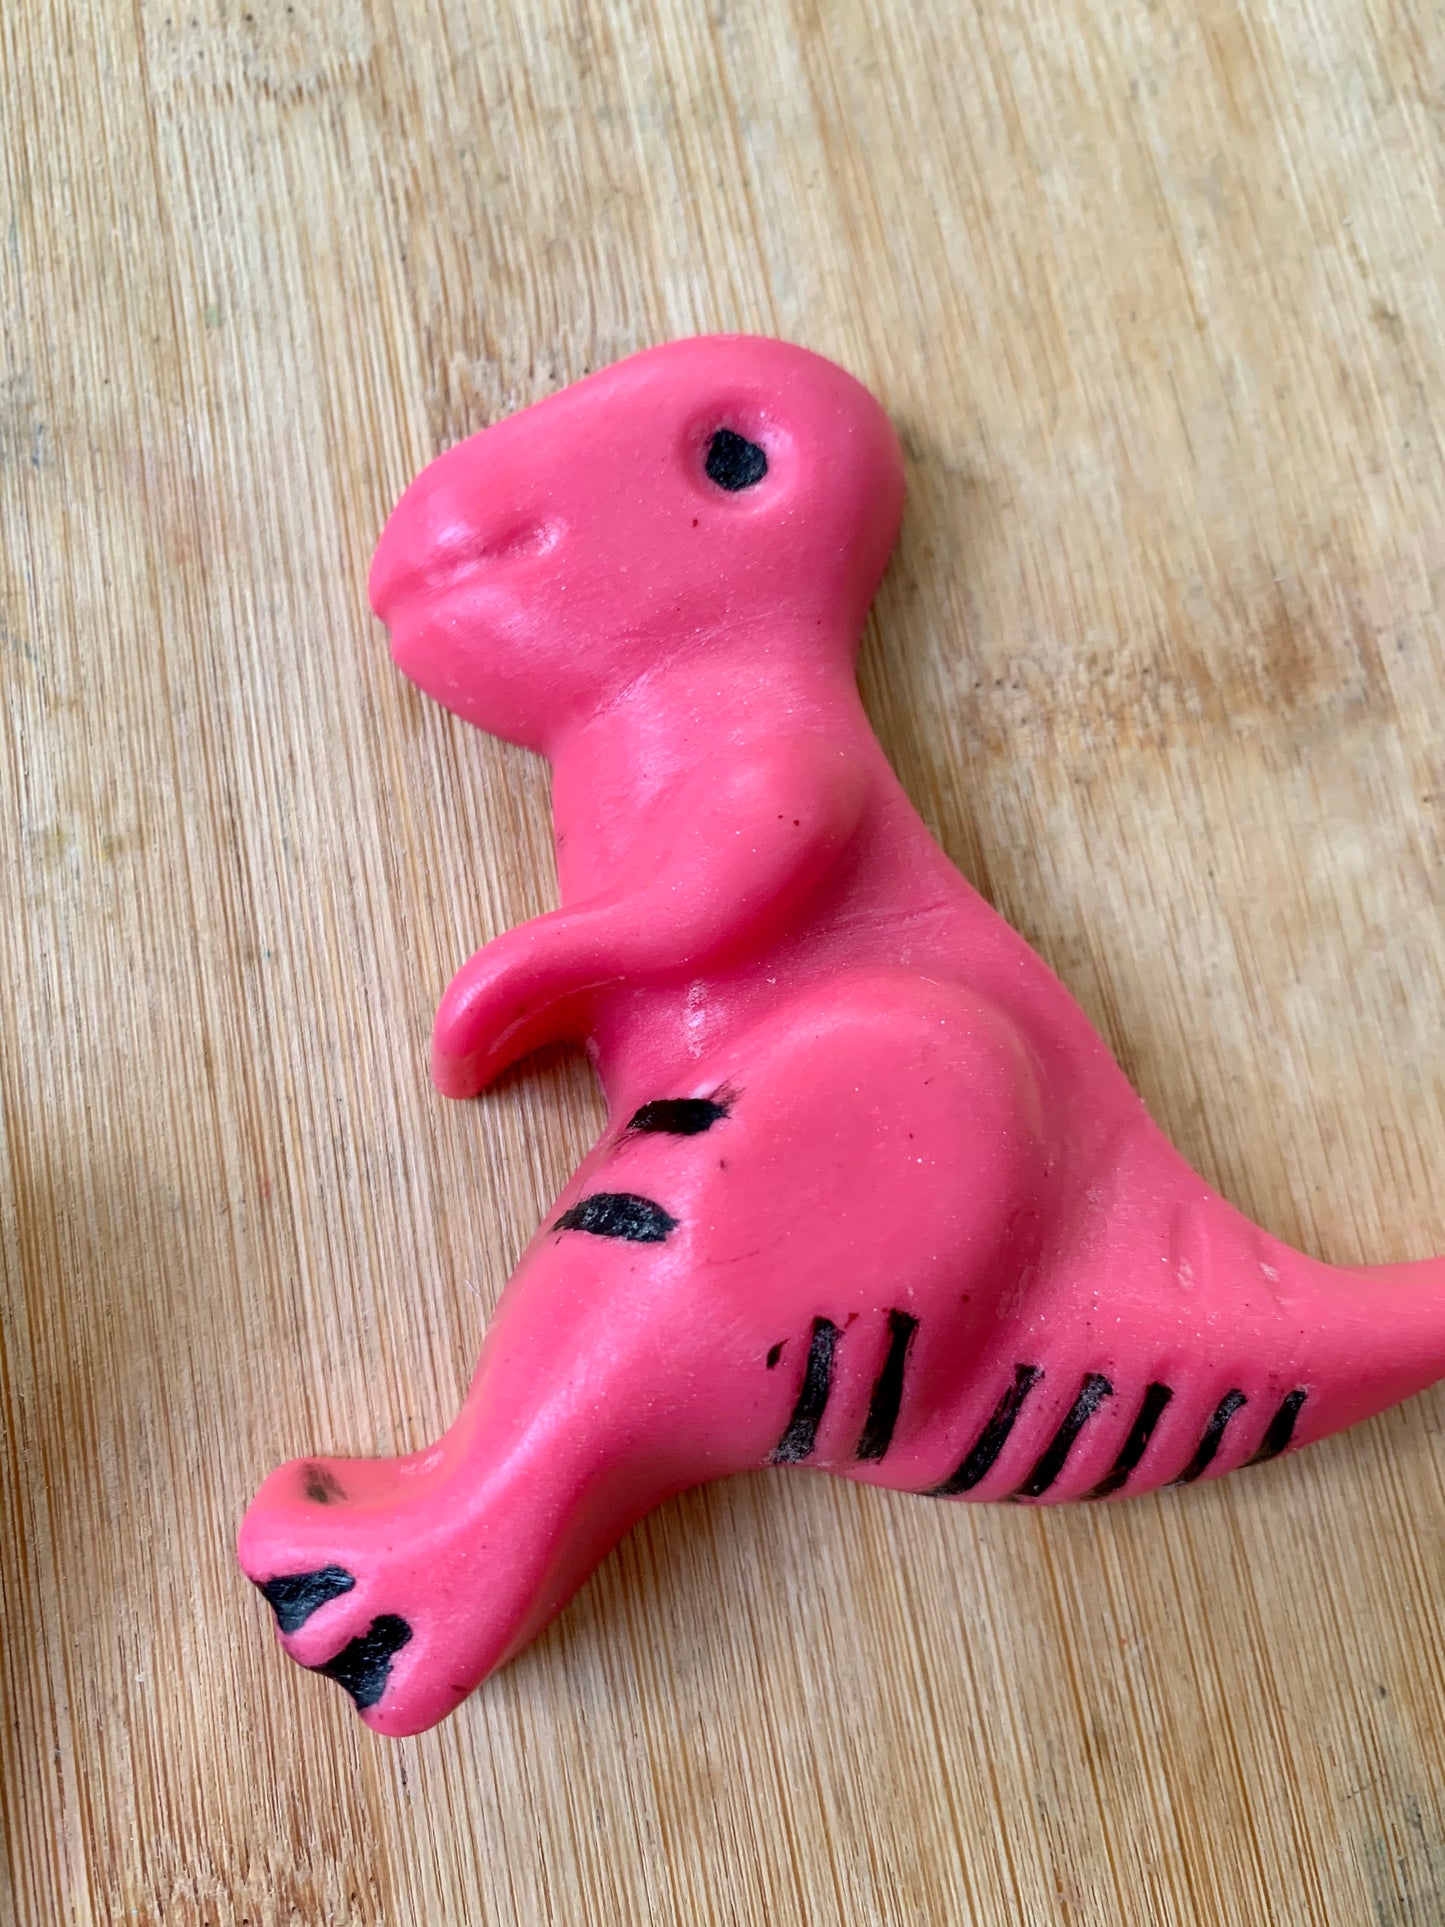 T-Rex Soap for Kids - Handcrafted with Shea Butter